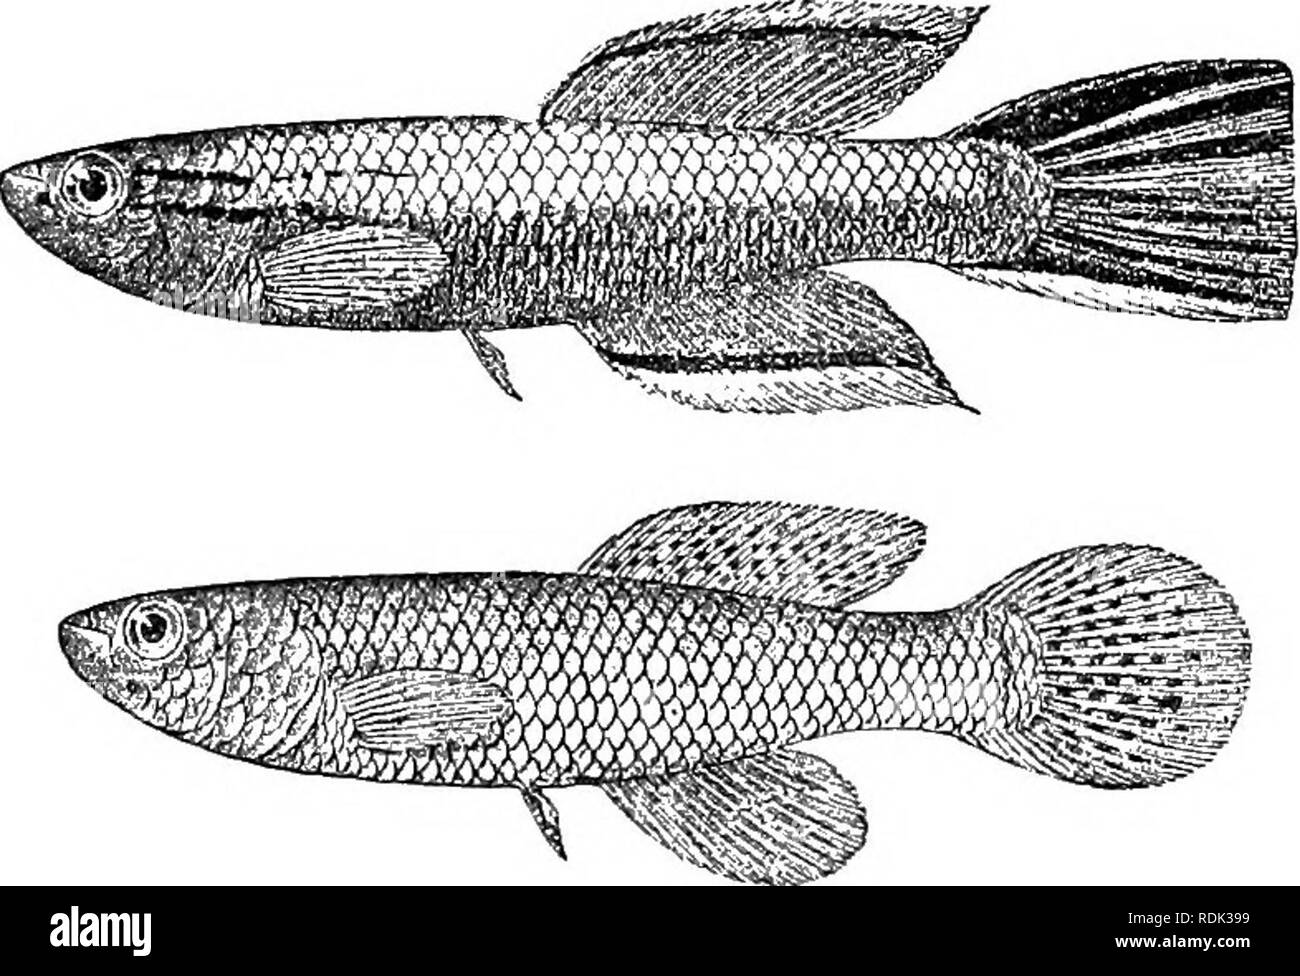 . Catalogue of the fresh-water fishes of Africa in the British museum (Natural history) ... Fishes; Freshwater animals. 38 CYPElNODOXTID.i:. 15, FUNDULUS SJOESTEDTI. LGnnberg, Ofv. Ak. Forh. Stockli. 1895, p. 191 ; Racliow, Bl. Aq. Terr. 1911, p. 101, fig.; Traber, t. c. p. 6(59, fig.; Arnold, Woch. Aq. Terr. 1911, p. 137, fig. Dopth of body 4 to ^ times in total length, length of head 3| to 3| times. Head flat above; snout short and broad, as long as eye ; mouth directed upwards ; lower jaw projecting ; eye 3^ to 4 times in length of head, nearly twice in interorbital width ; space between ey Stock Photo